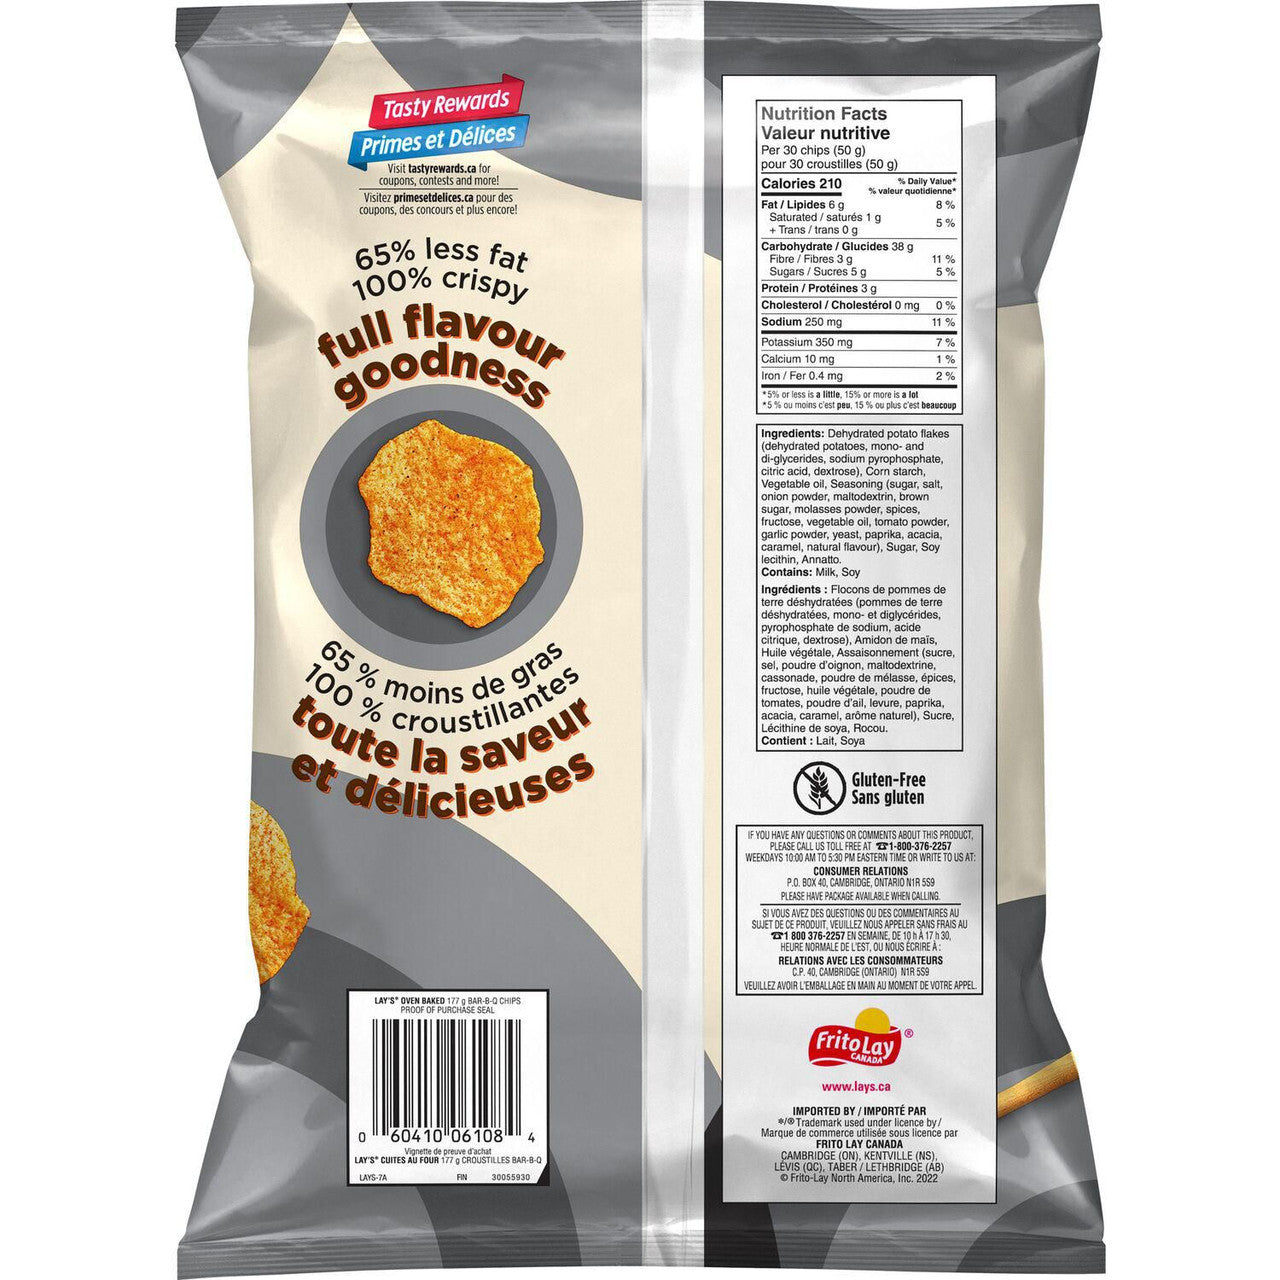 Lay's Oven Baked BBQ Potato Chips 177g/6.2 oz. (Imported from Canada)